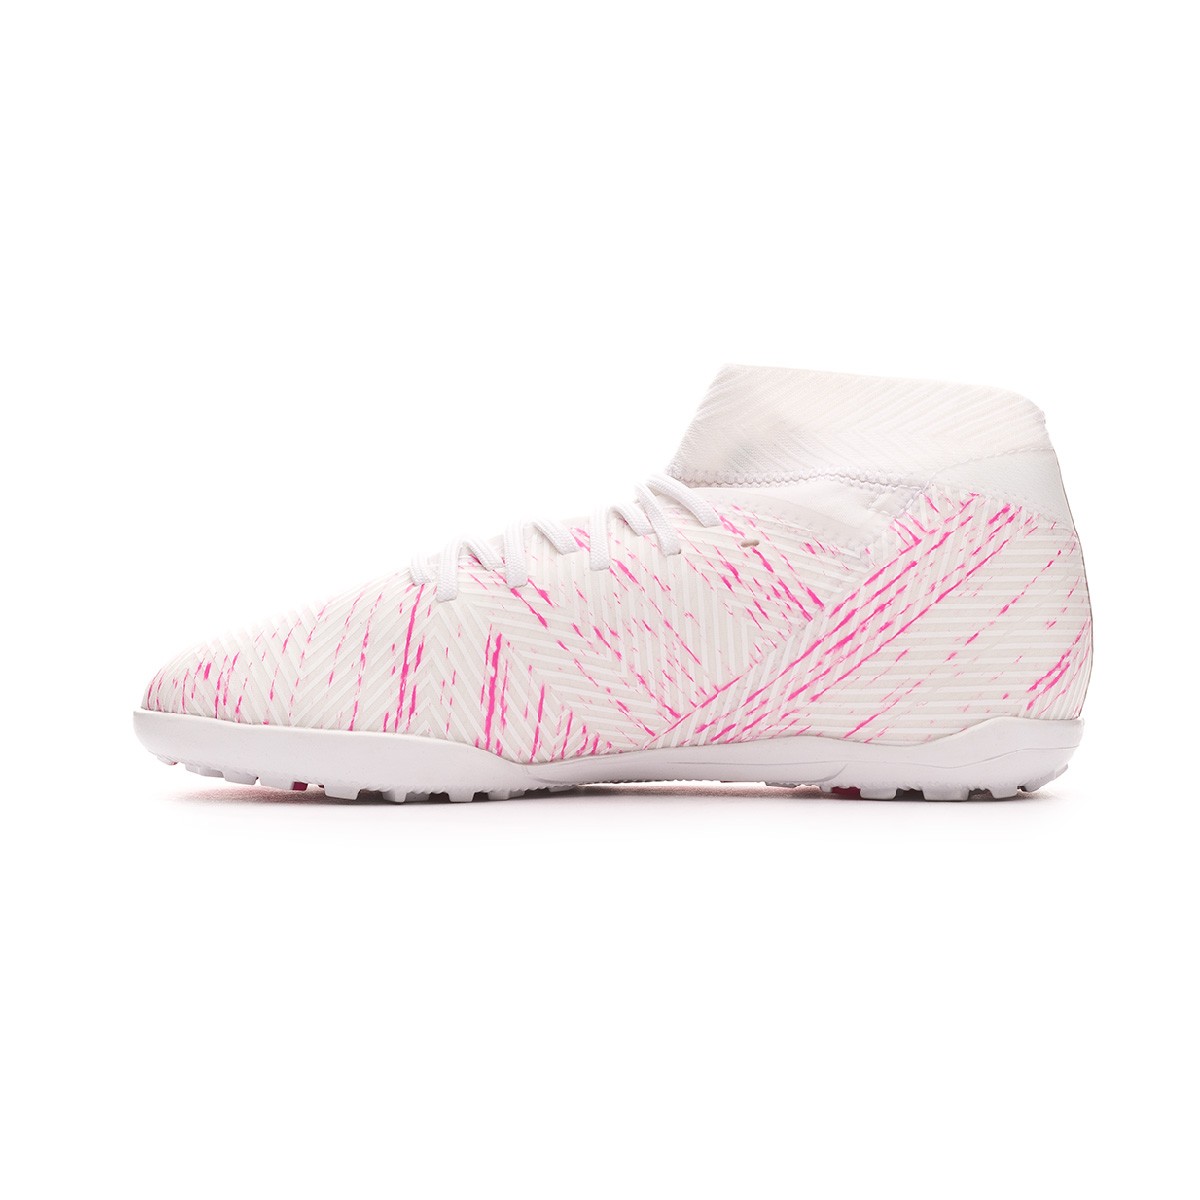 pink adidas astro trainers